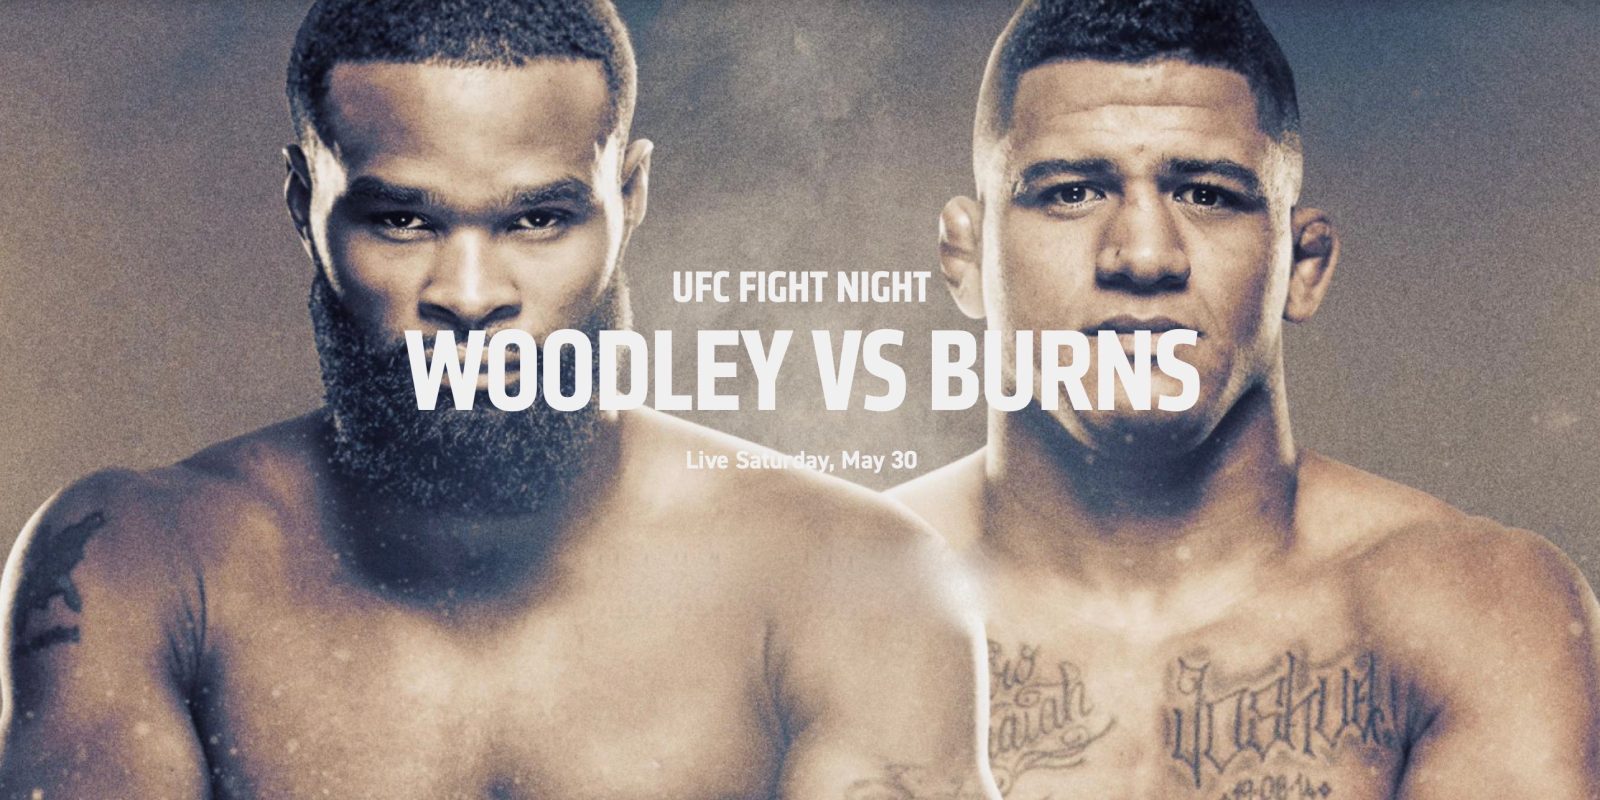 https://9to5mac.com/wp-content/uploads/sites/6/2020/05/how-to-watch-ufc-woodley-vs-burns-iphone-ipad-apple-tv.jpeg?quality=82&strip=all&w=1600